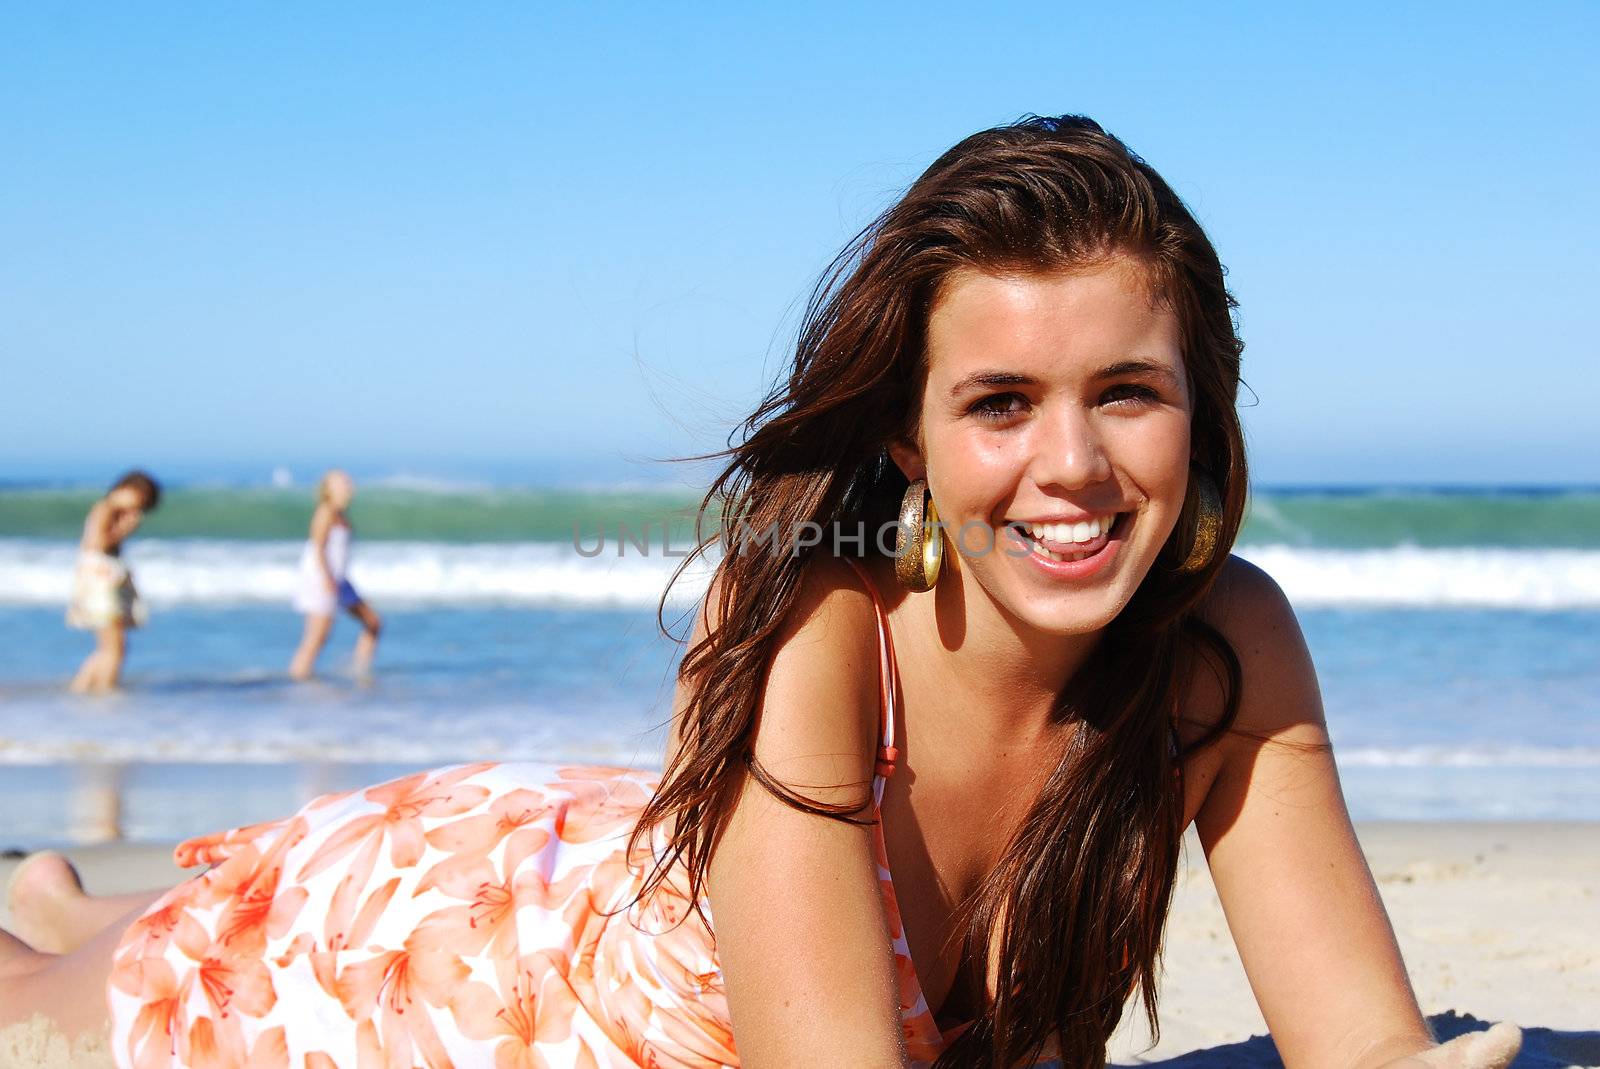 Young woman enjoying summer on the beach